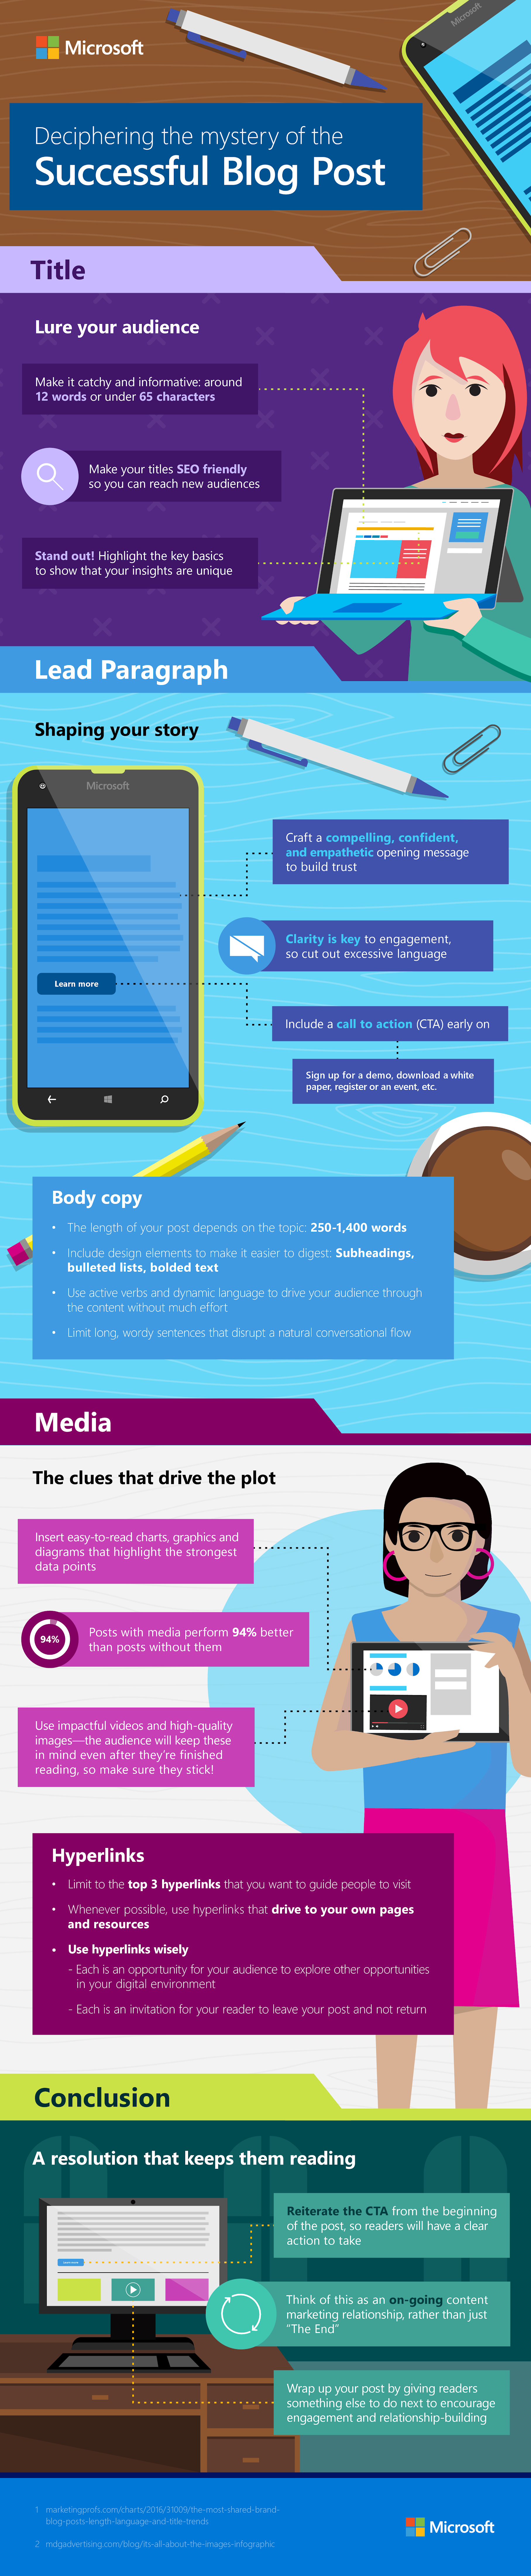 Desiphering the Mystery of the Successful Blog Post - #infographic